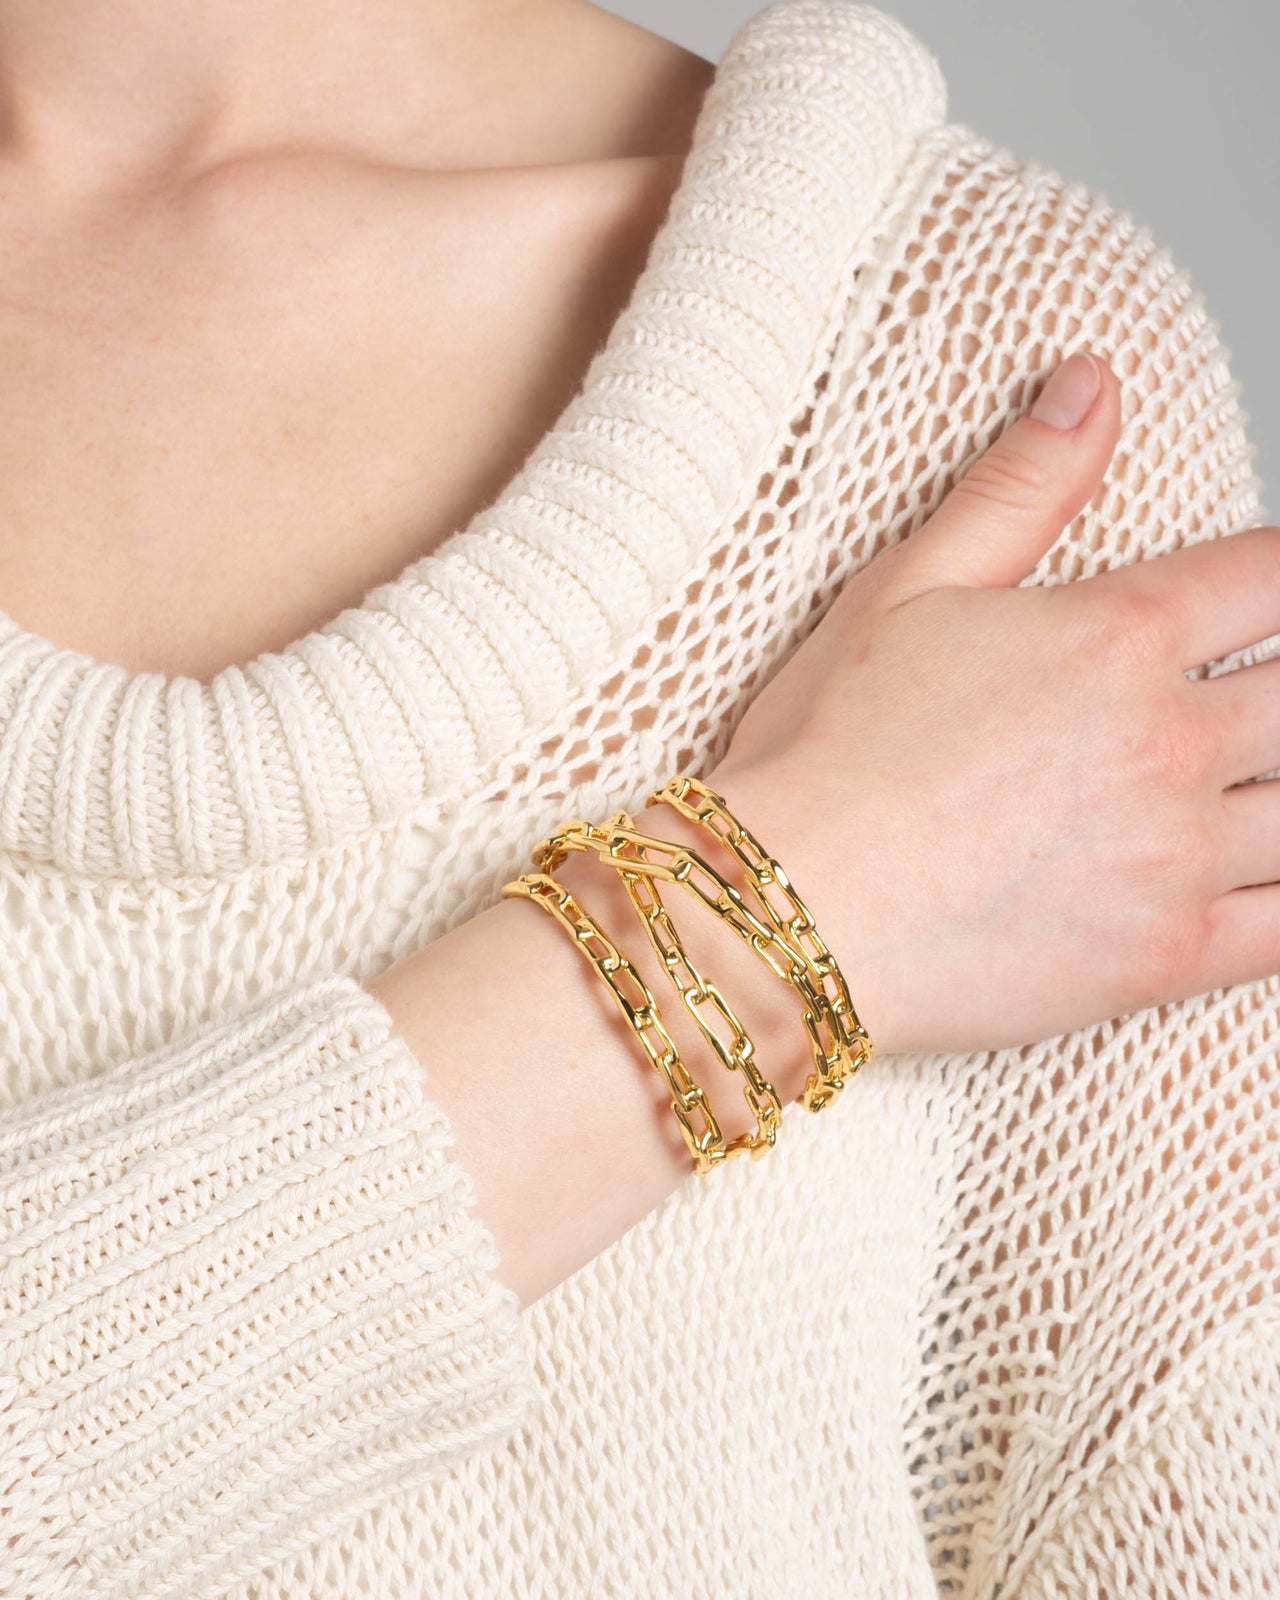 Wrapped Gold Chain Cuff Bracelet - Photo 2